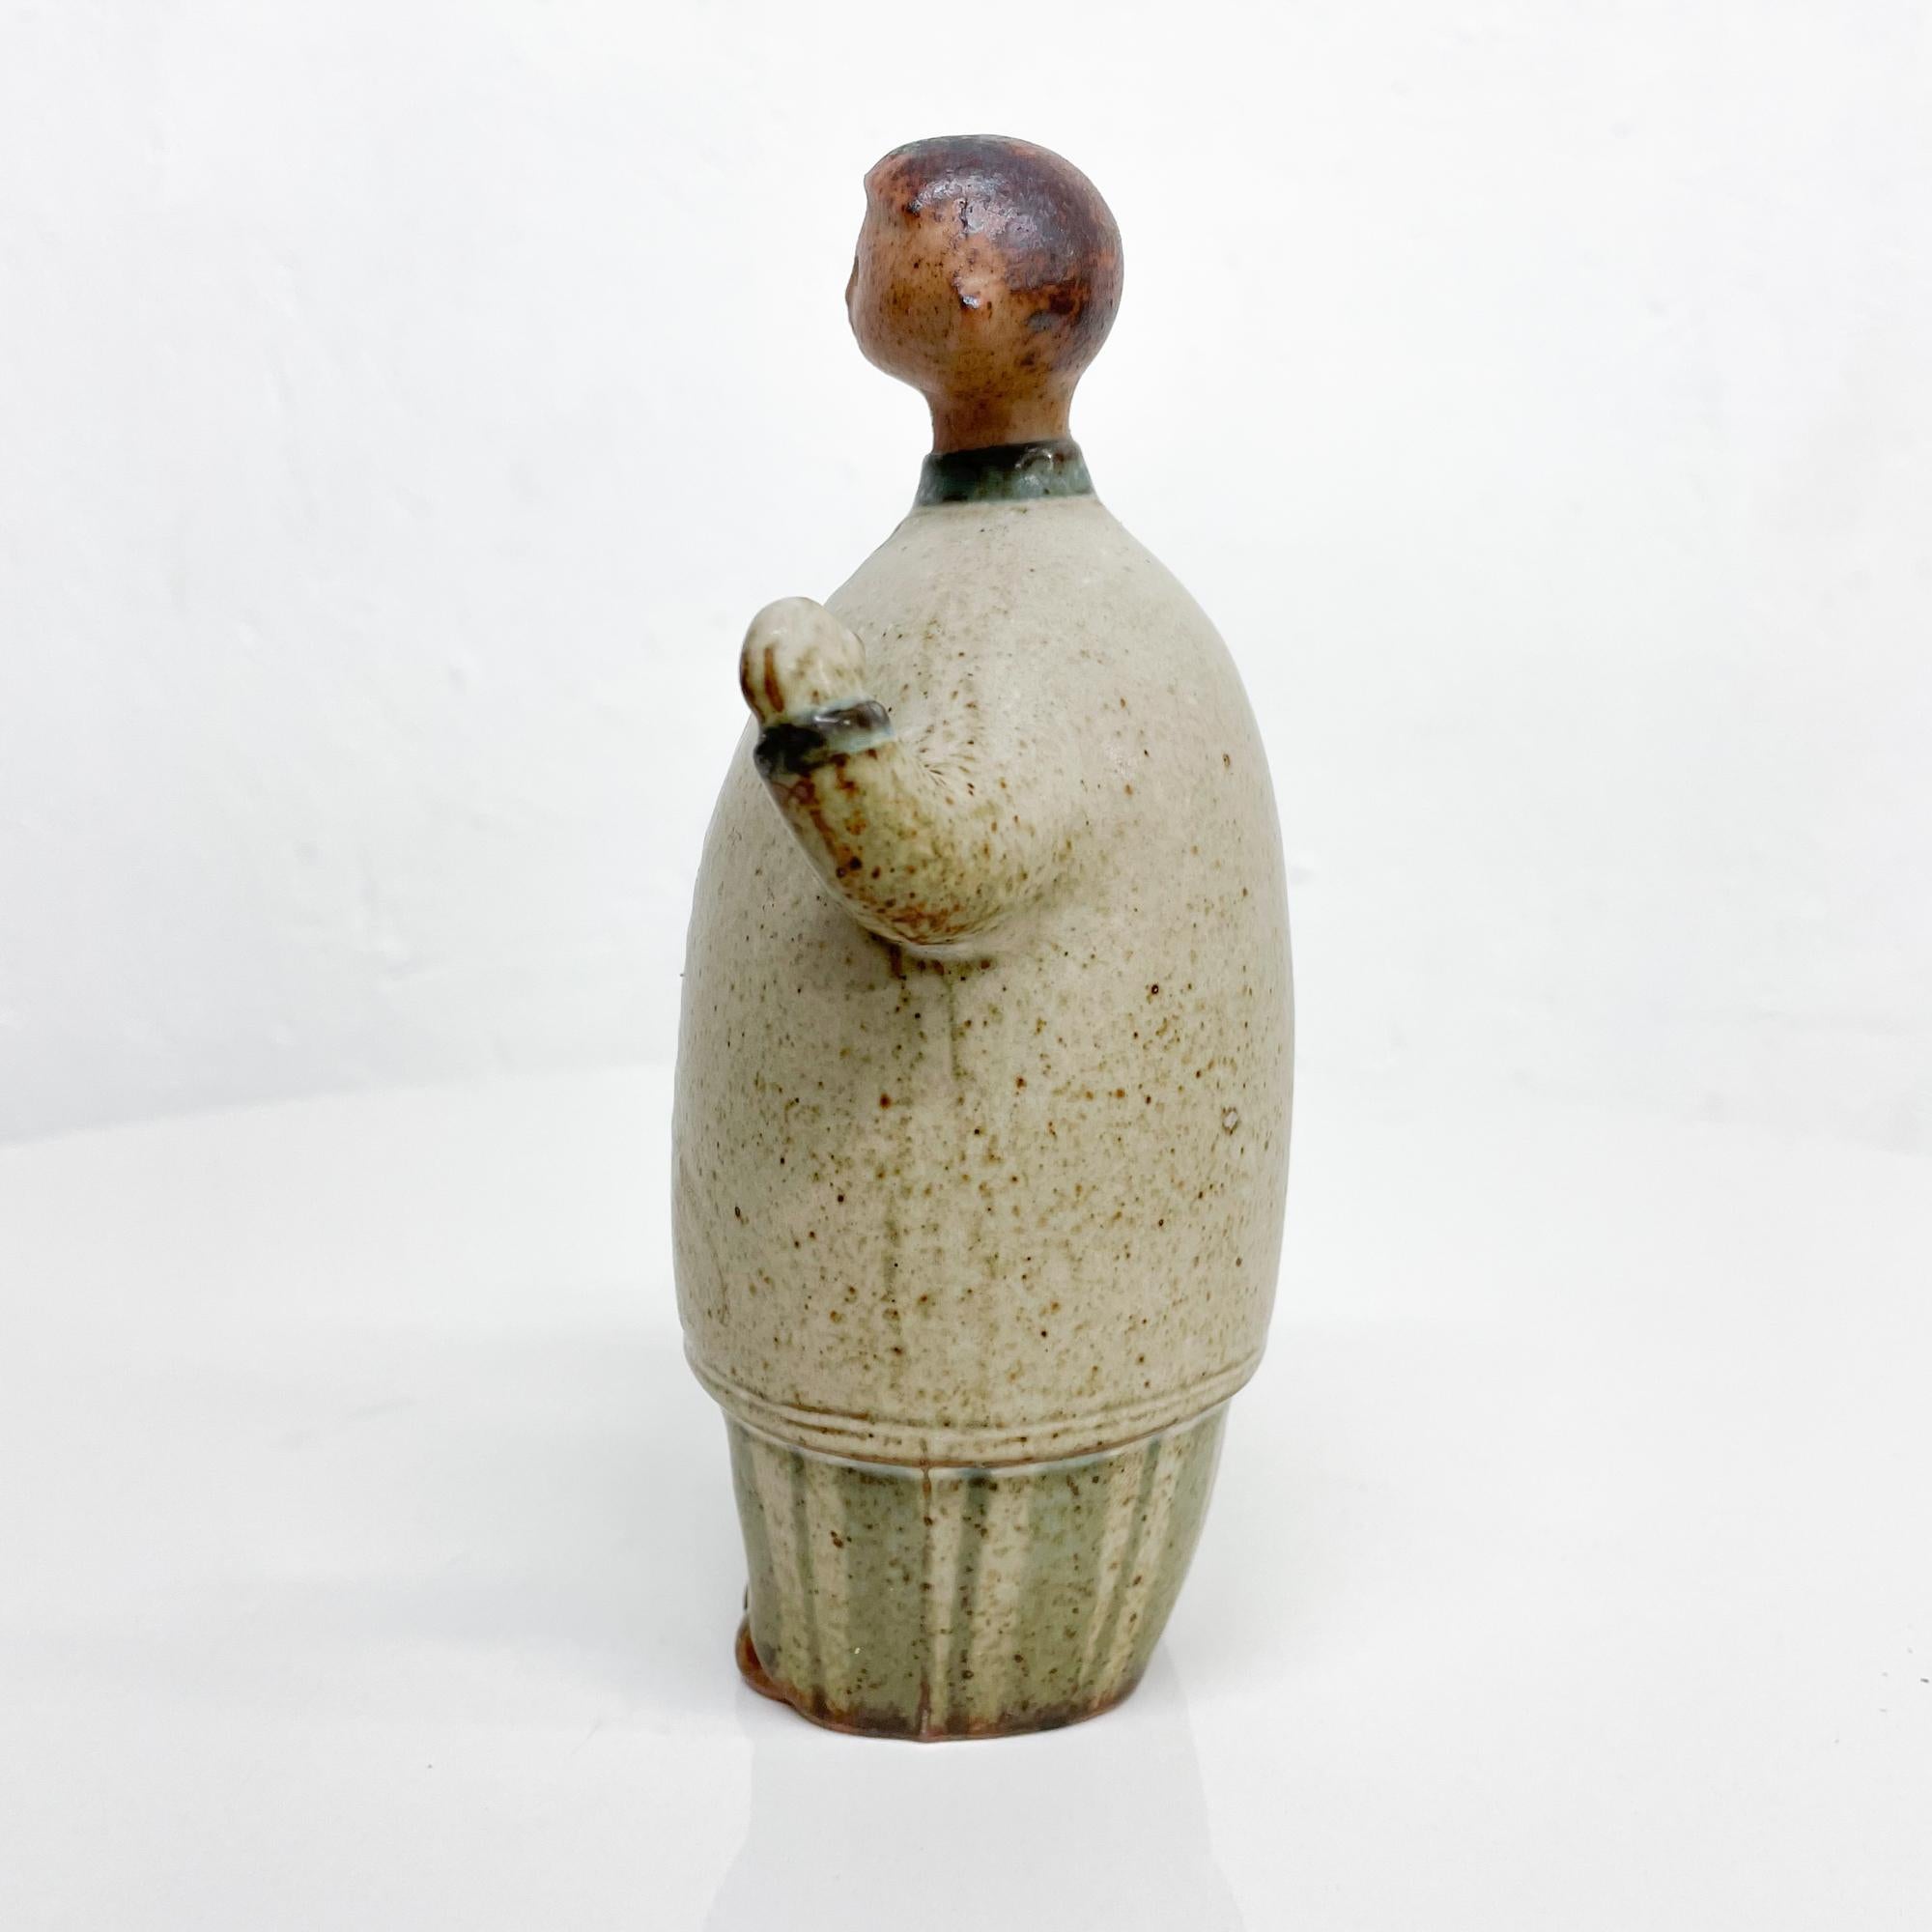 Ceramic pottery figures. His and hers figures are carefully crafted. 
Unmarked, no label present. 
Work is consistent with Scandinavian pottery, attributed in style to Lisa Larson. 
Dimensions: 6.5